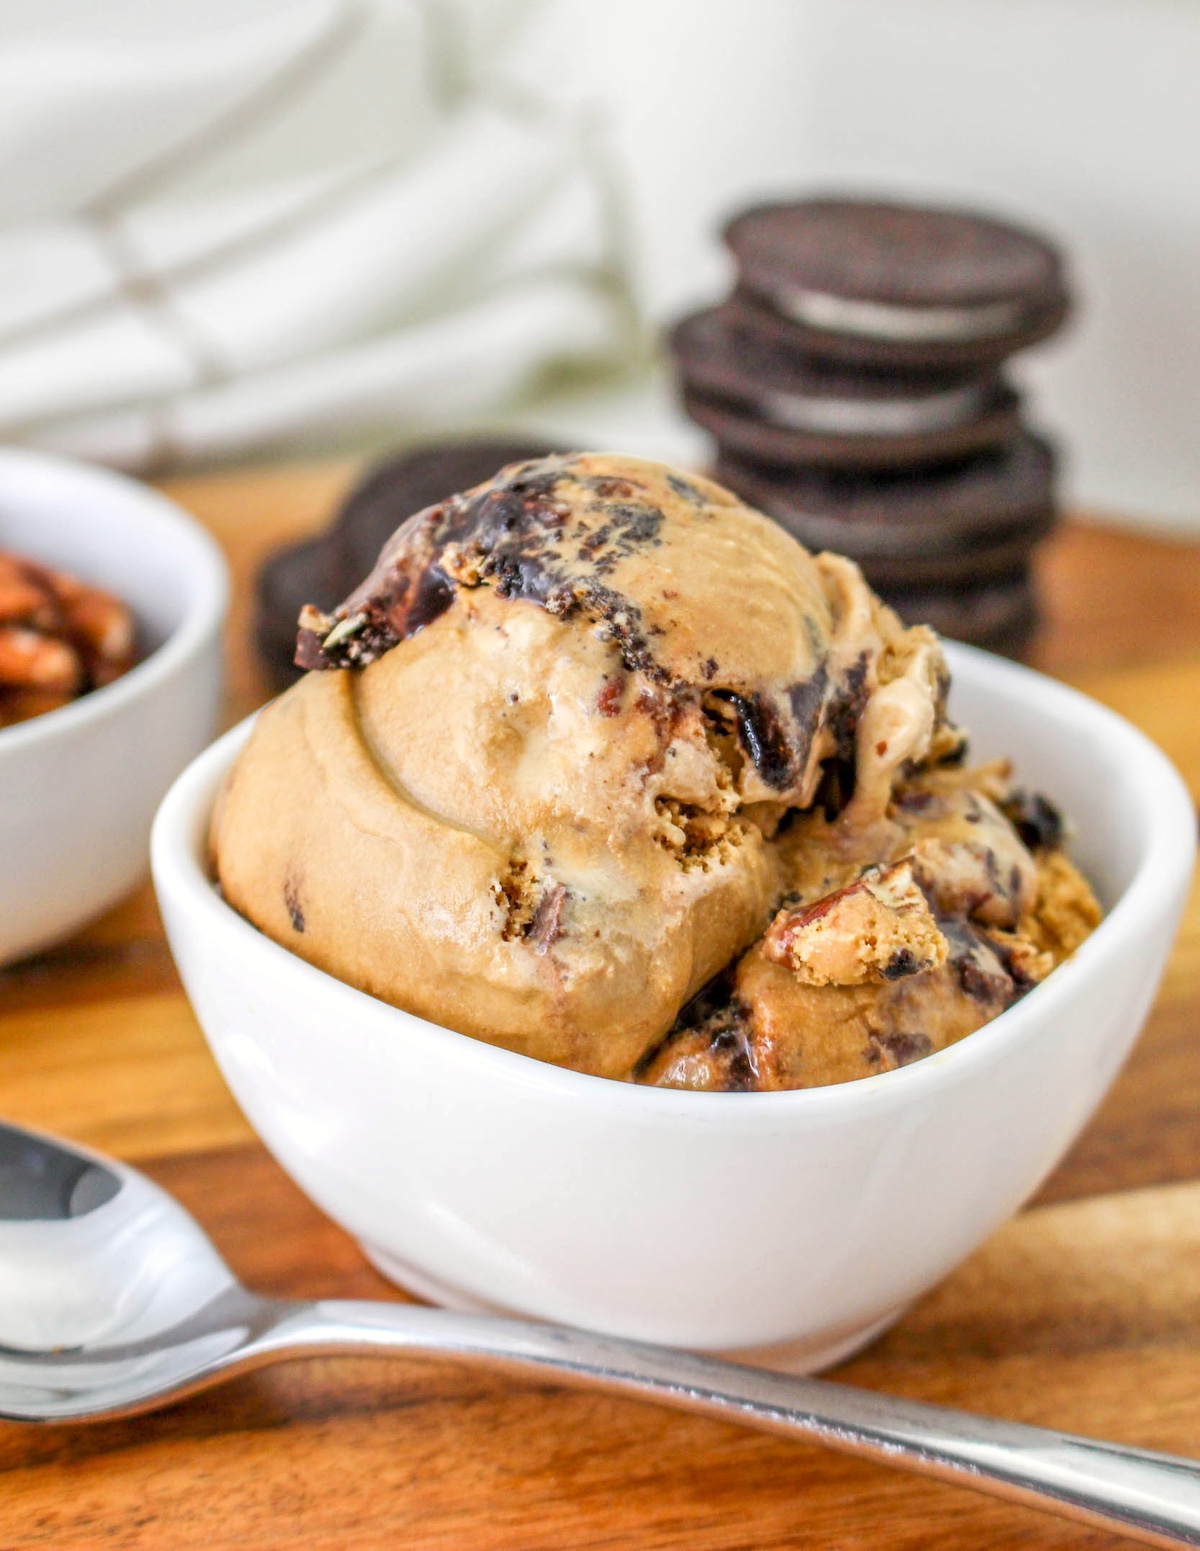 Mississippi Mud Ice Cream in a bowl on a table